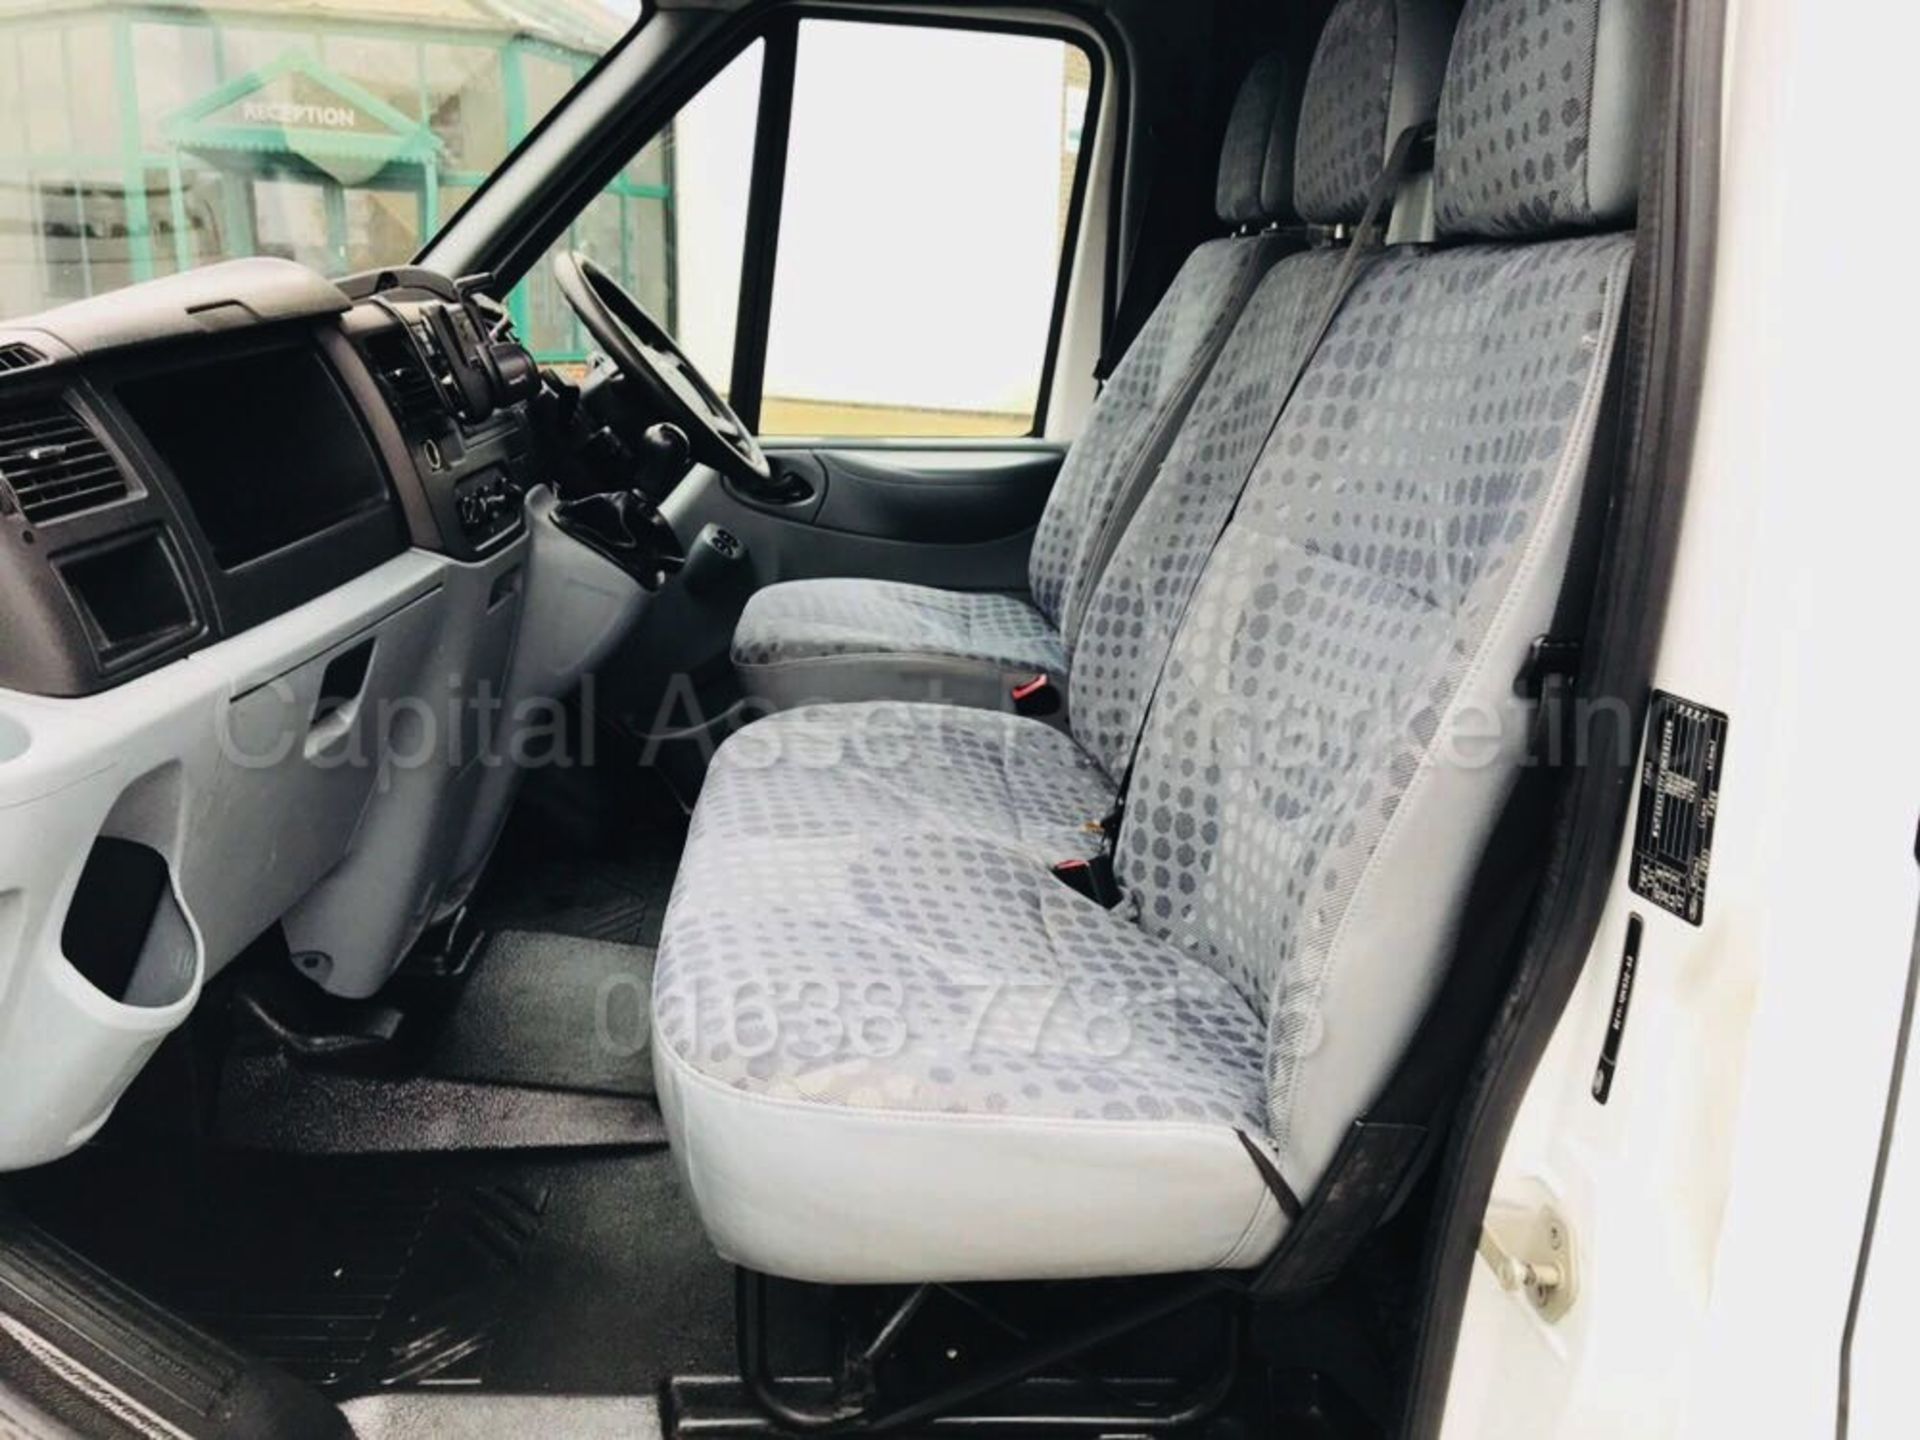 FORD TRANSIT 85 T260 SWB *SPORTY* (2010 MODEL) '2.2 TDCI - 85 PS - 5 SPEED' (NO VAT - SAVE 20%) - Image 11 of 22